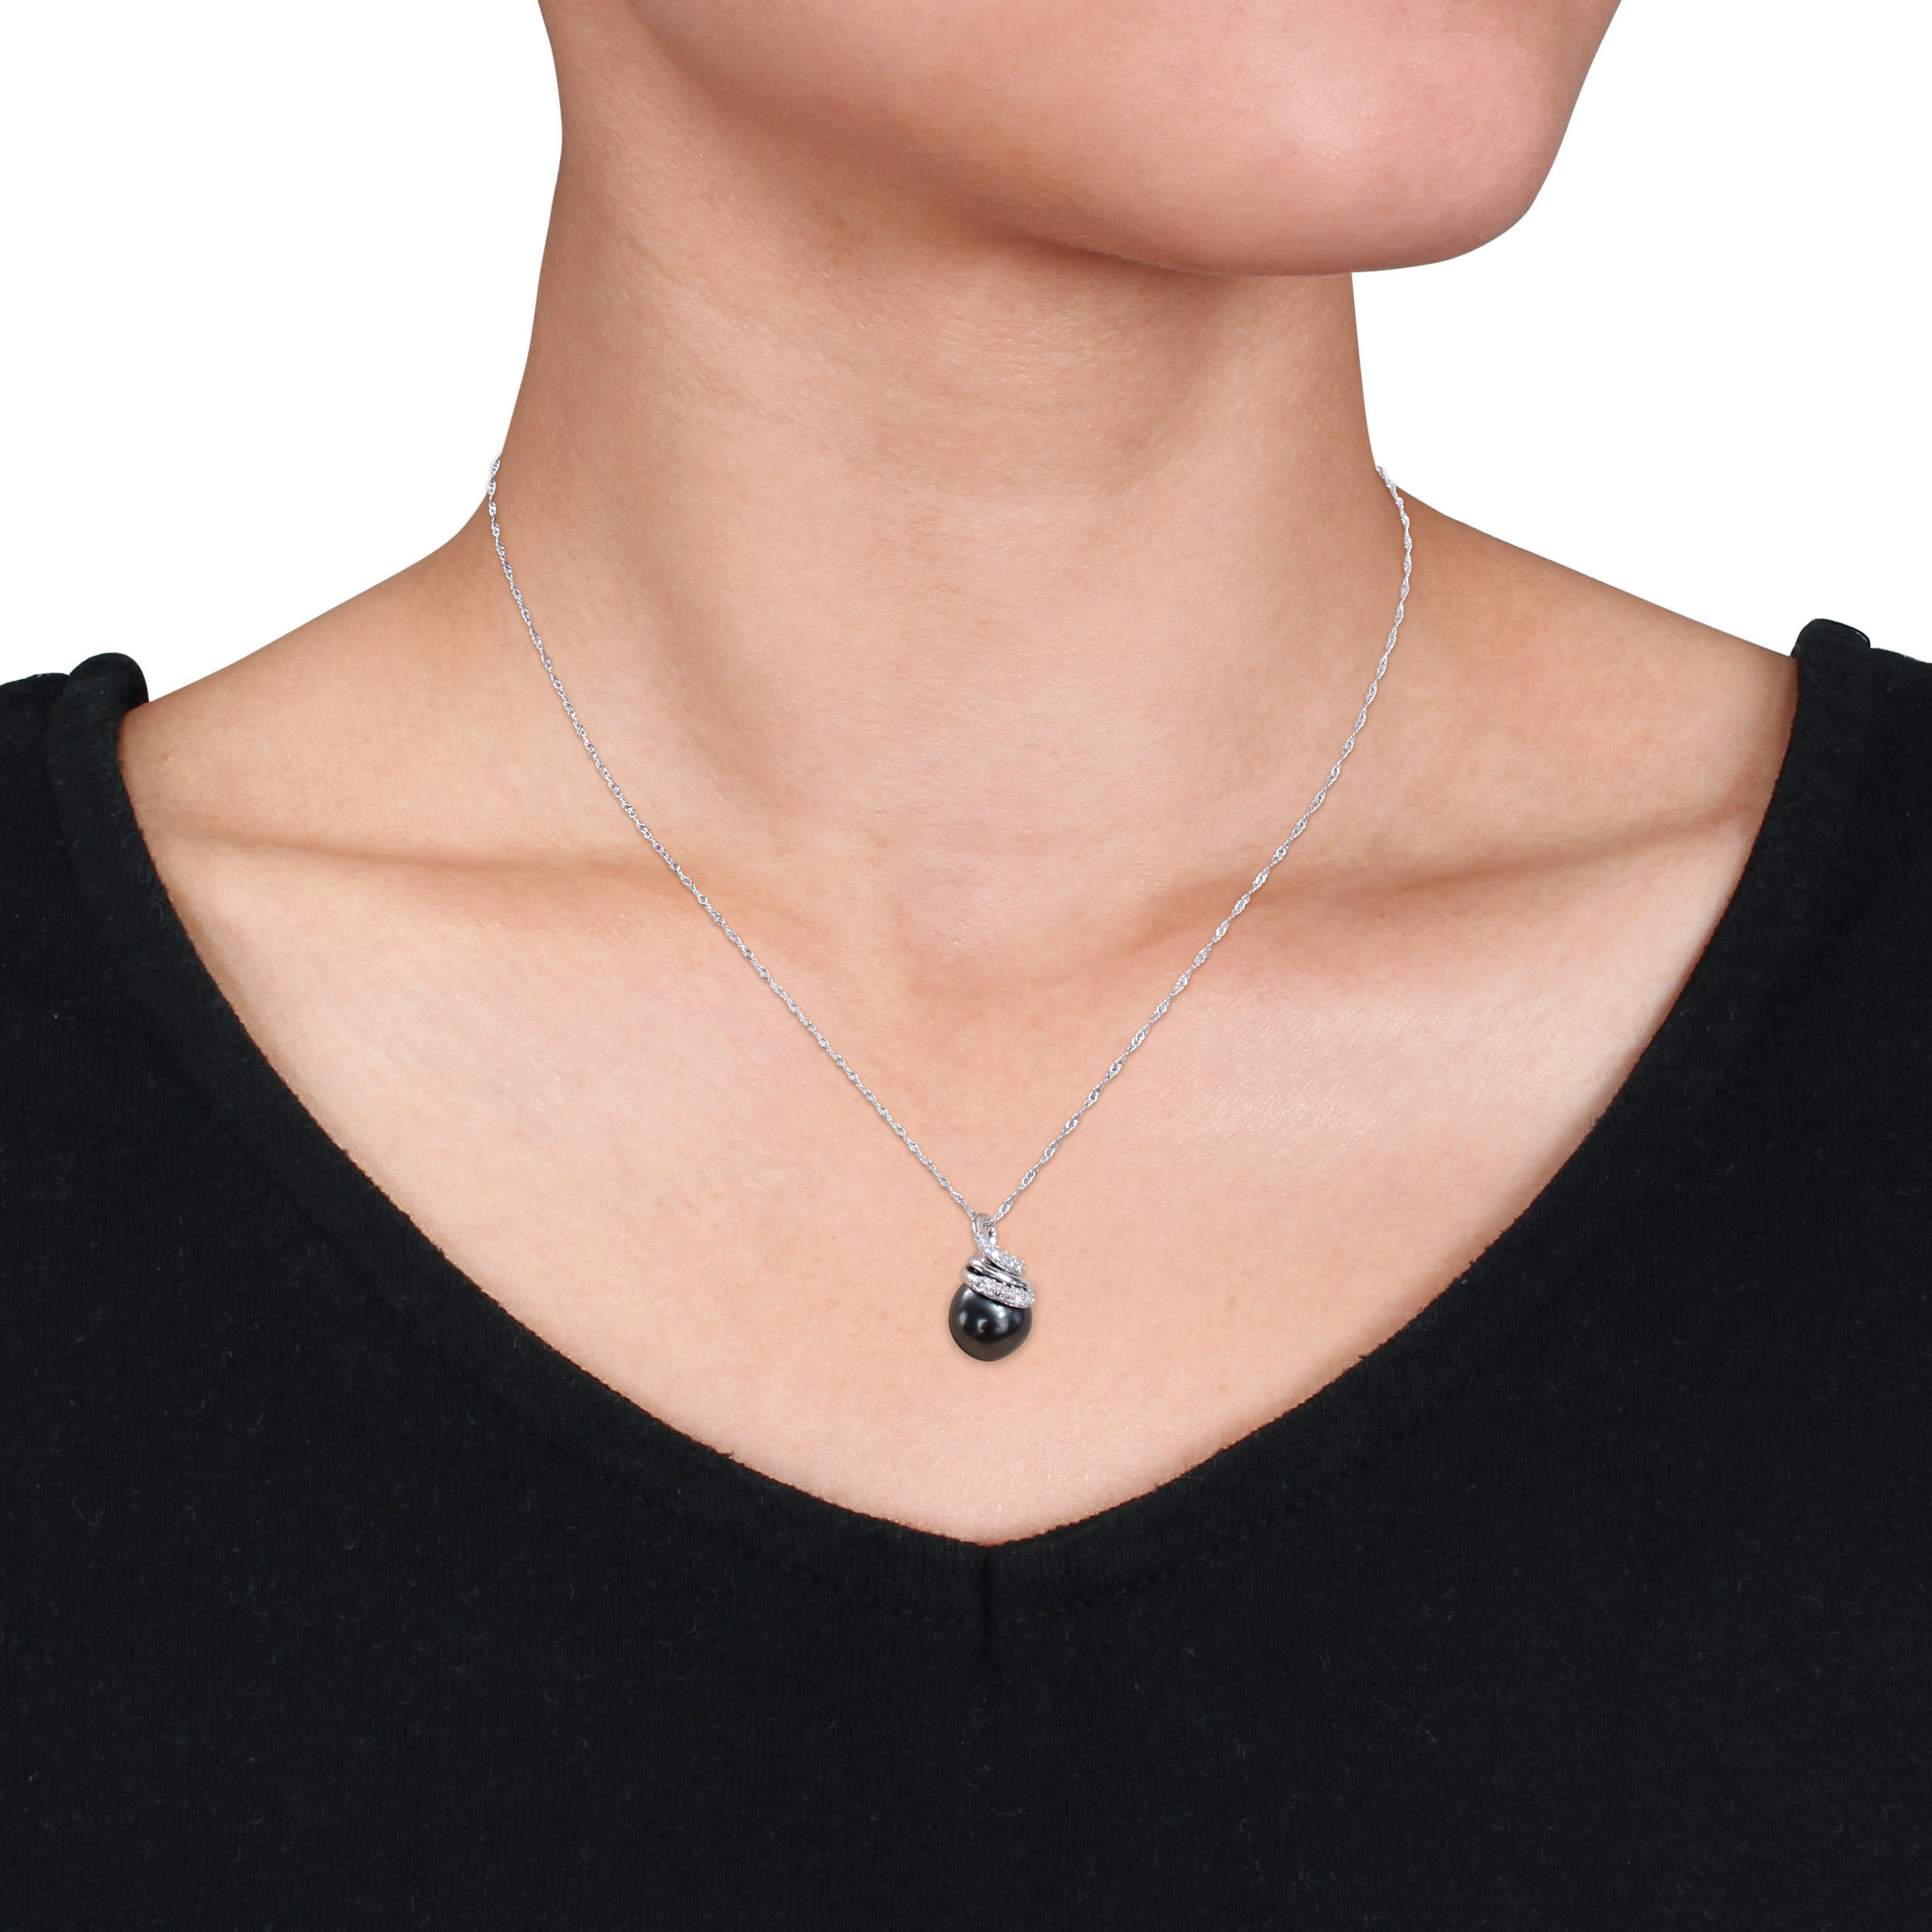 9-10 MM Black Tahitian Cultured Pearl & 1/10 CT TW Diamond Swirl Pendant with Chain in 14k White Gold